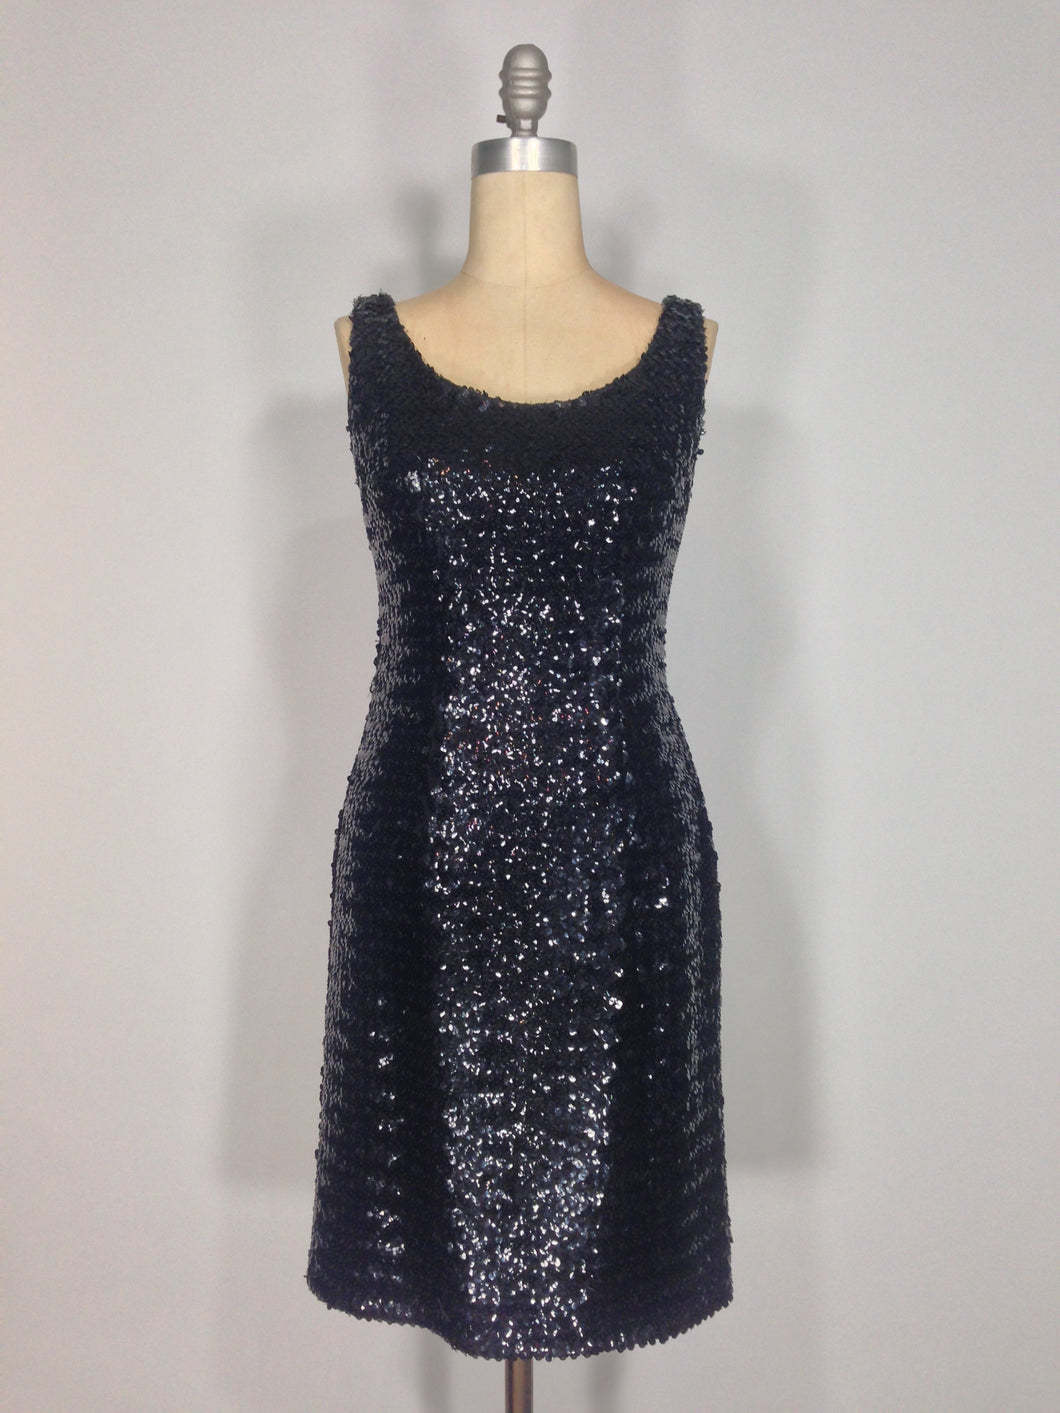 1950’s Black sequin Pin-up wiggle dress